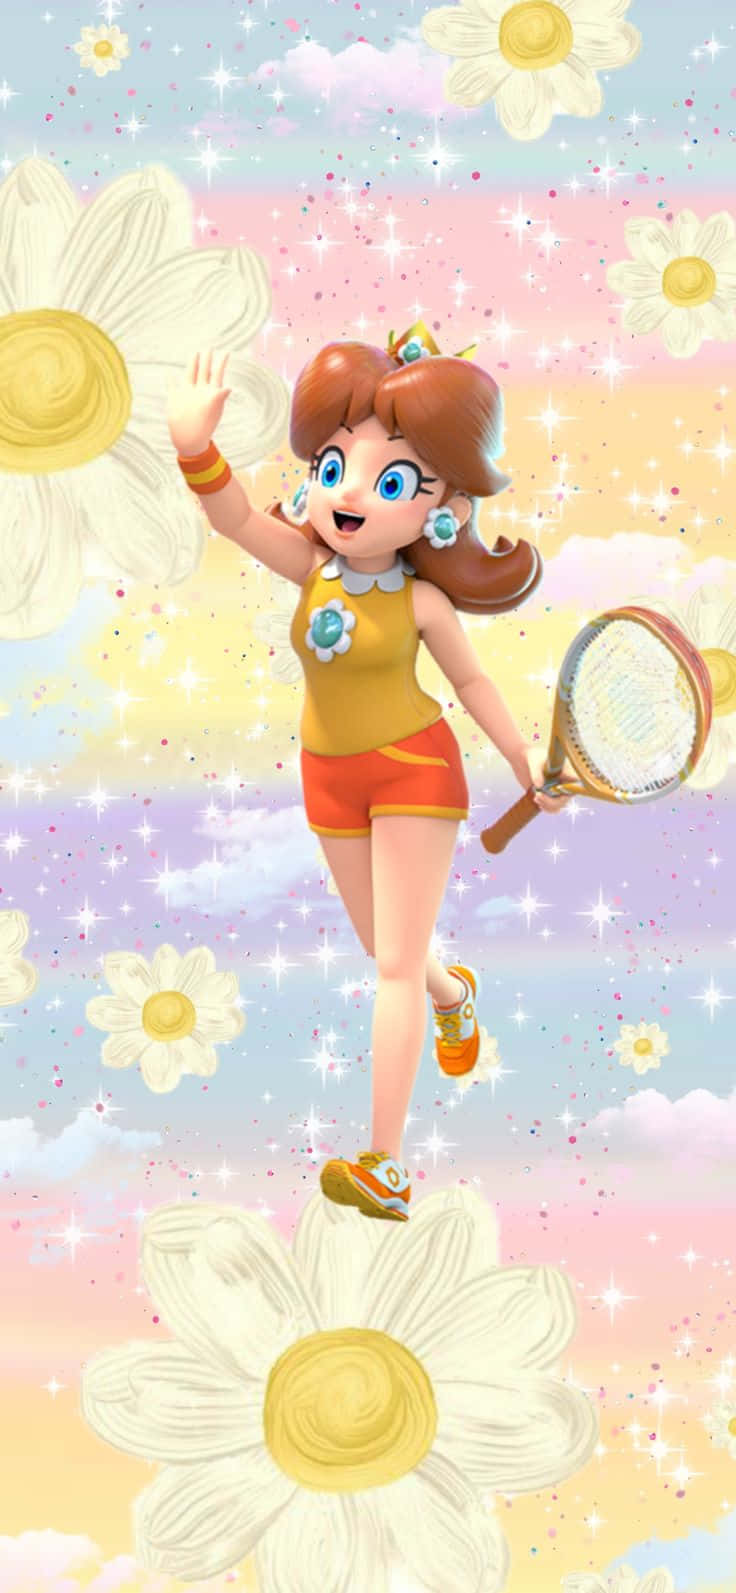 Radiant Princess Daisy with a confident smile Wallpaper